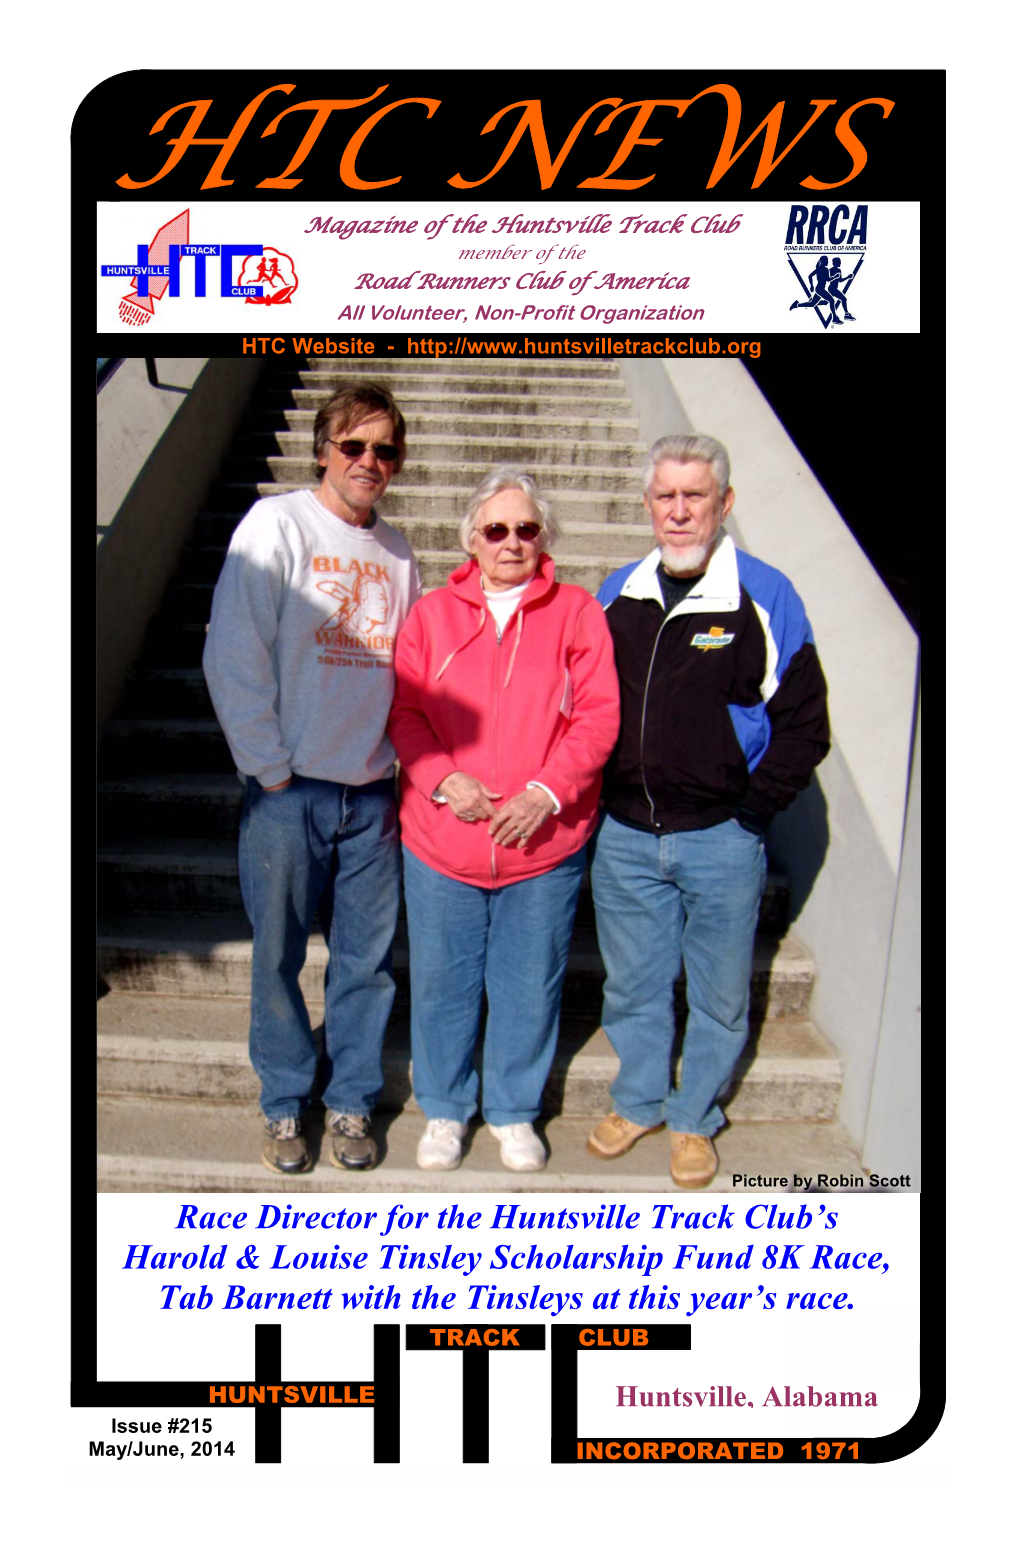 Race Director for the Huntsville Track Club's Harold & Louise Tinsley